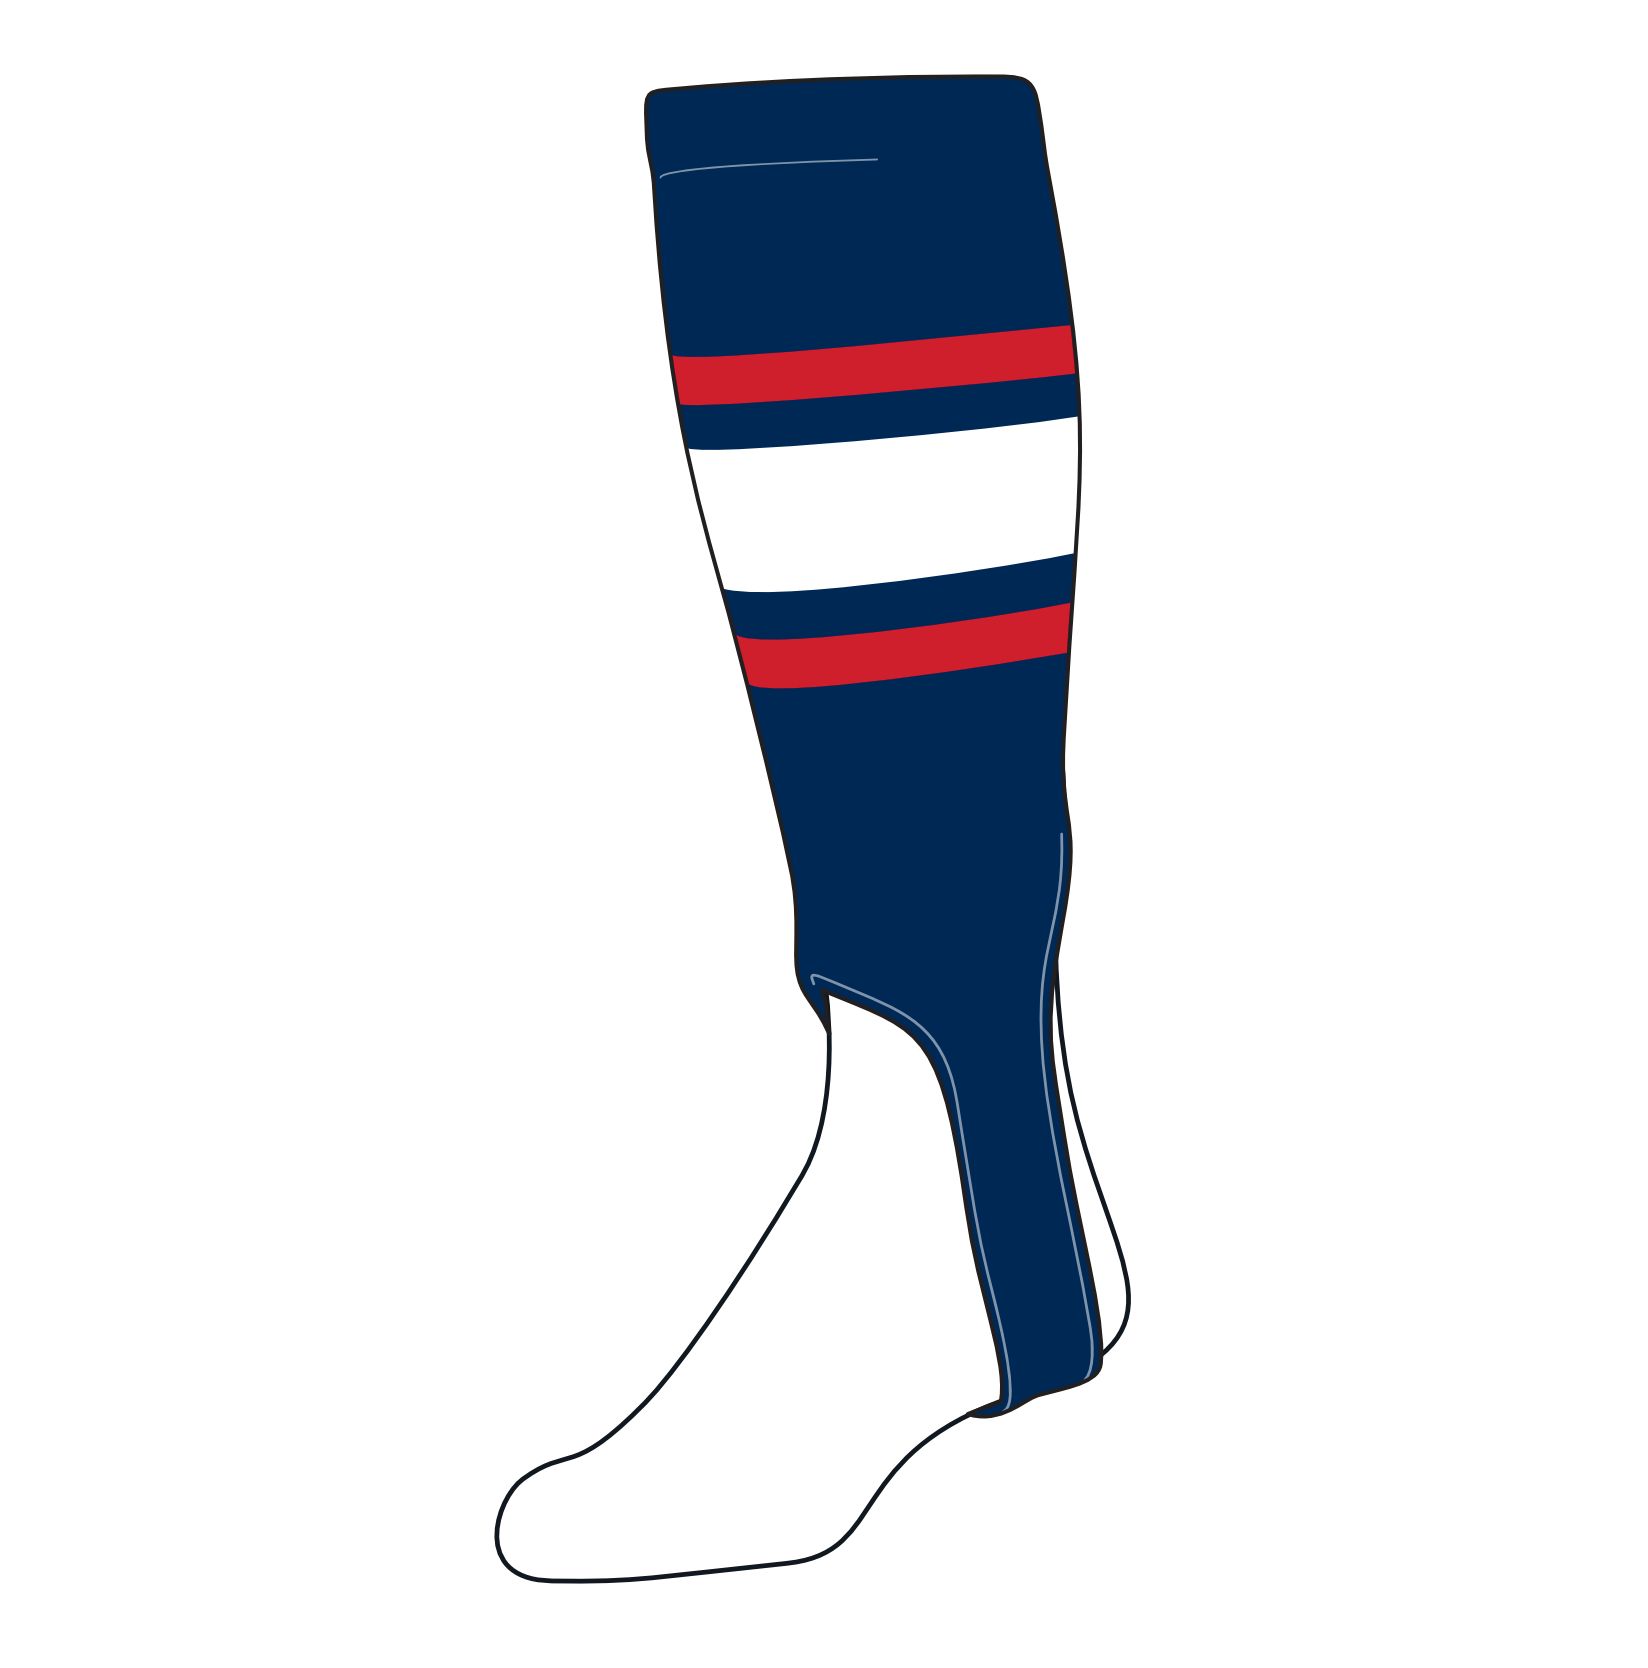 TCK Baseball Stirrups Small/Youth (100E, 5in) Navy, Red, White